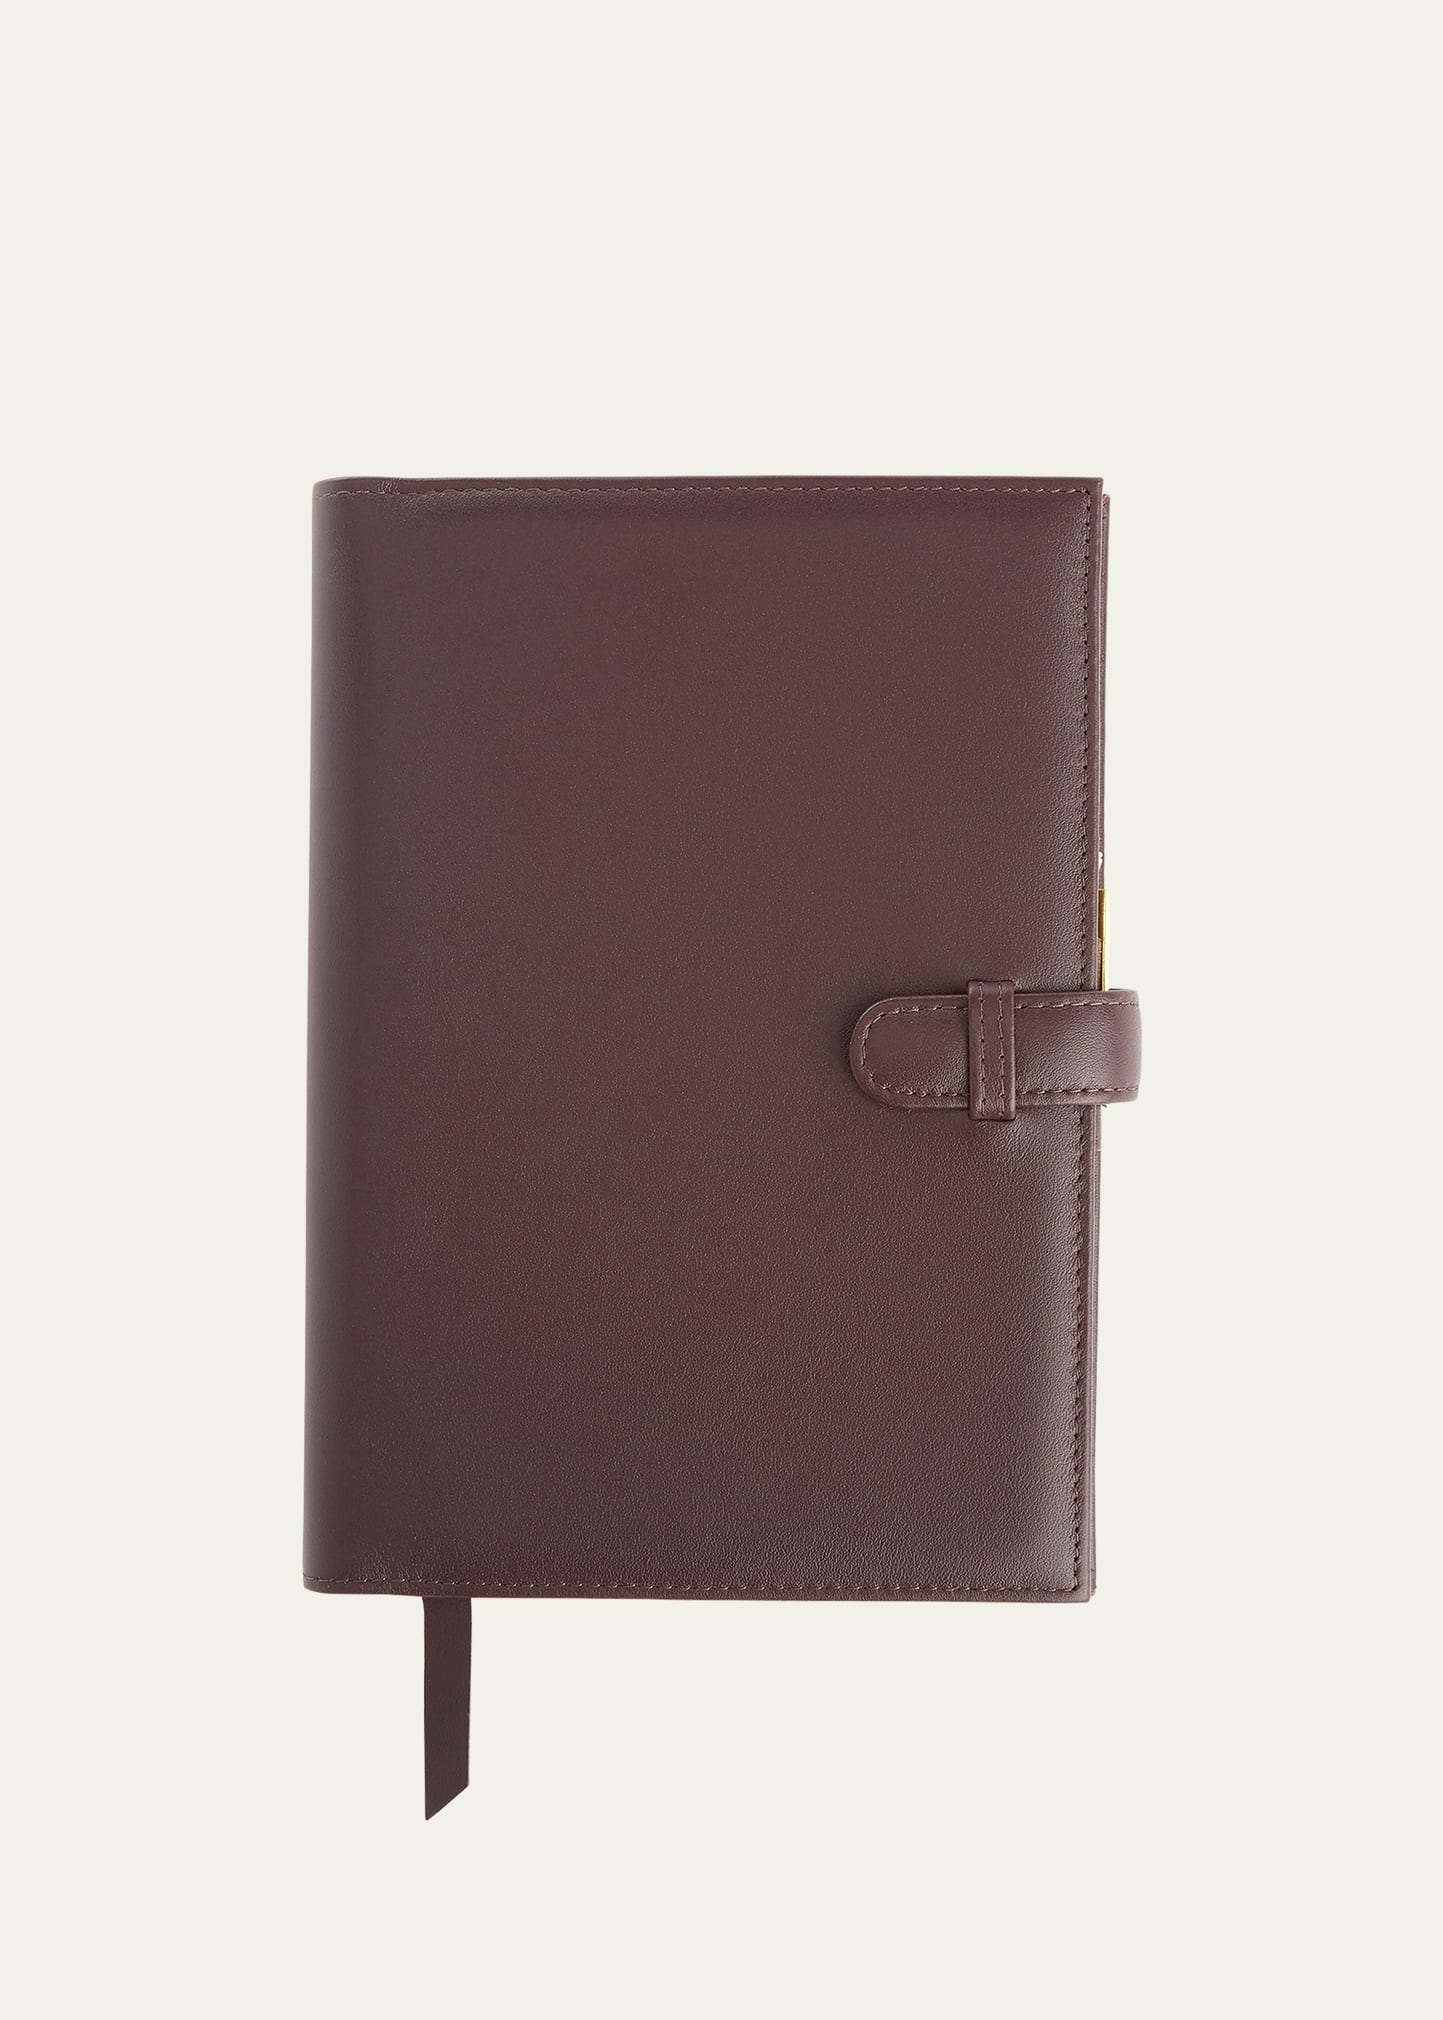 Royce New York Personalized Executive Leather Daily Planner In Burgundy